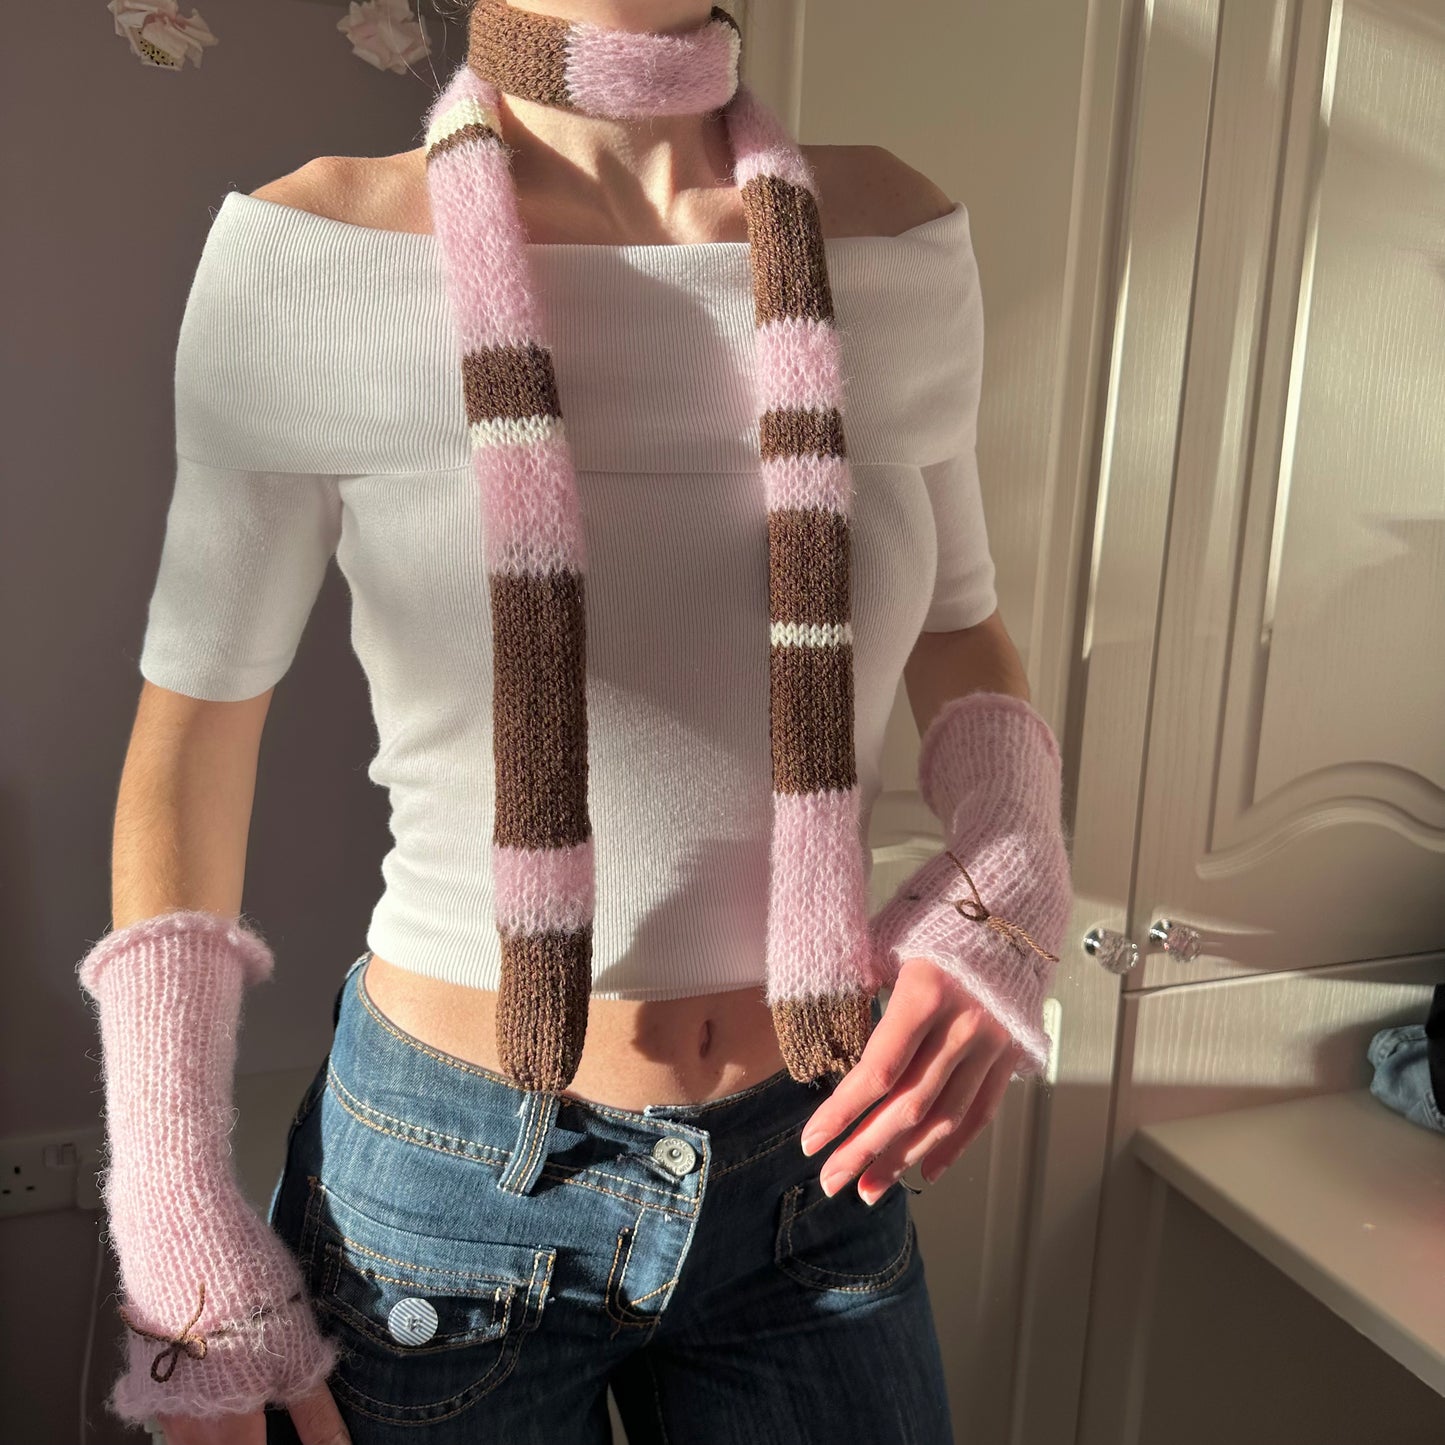 Handmade knitted brown, cream and baby pink striped skinny scarf